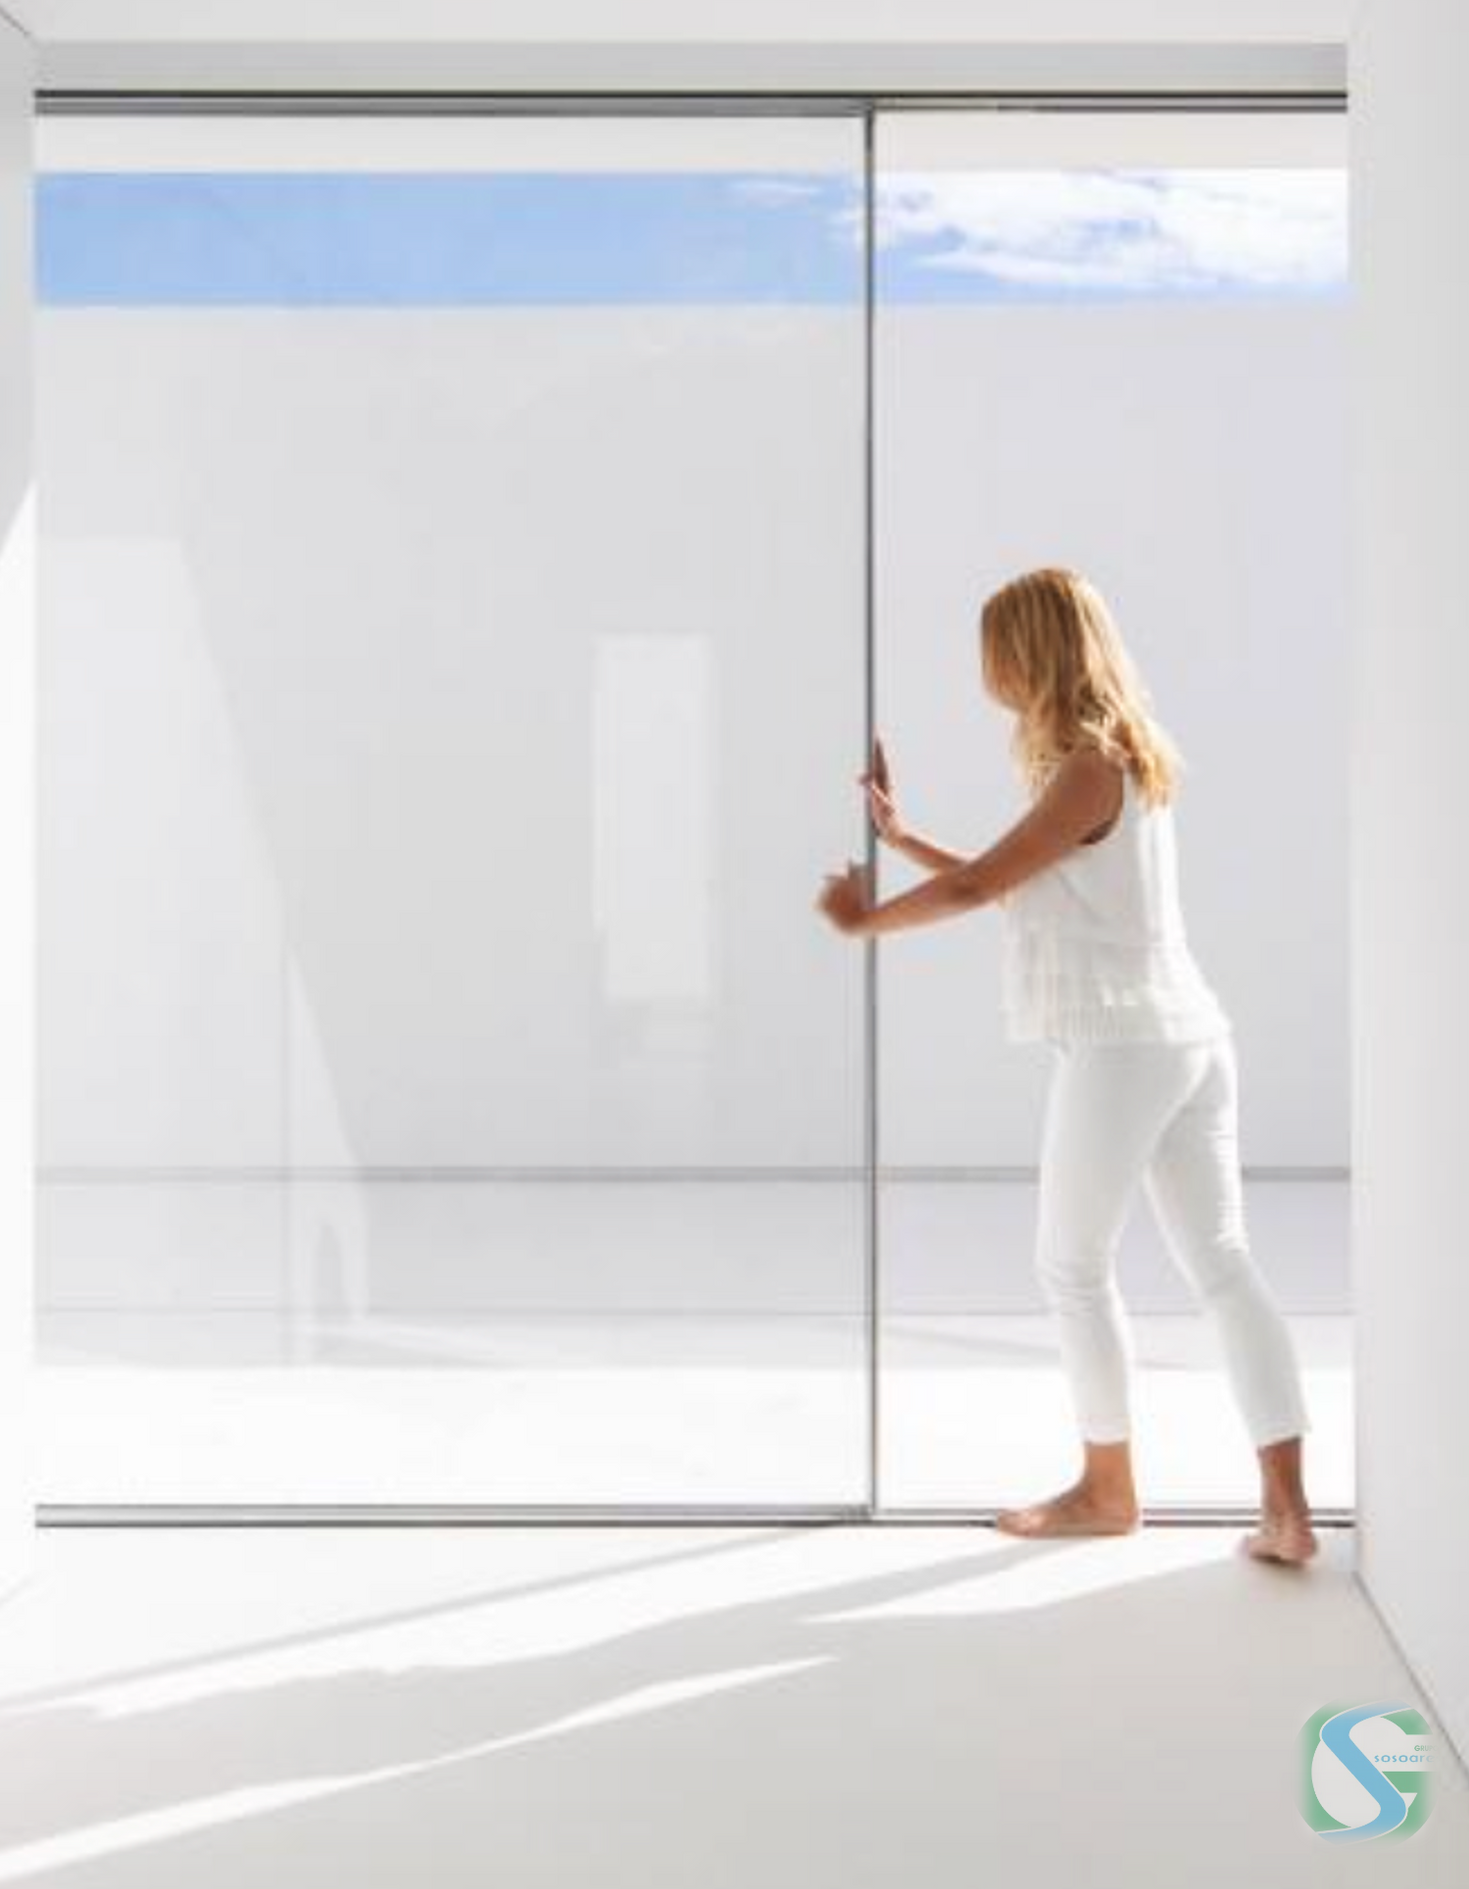 Lady dressed in all white opening a sliding glass door with all white background.